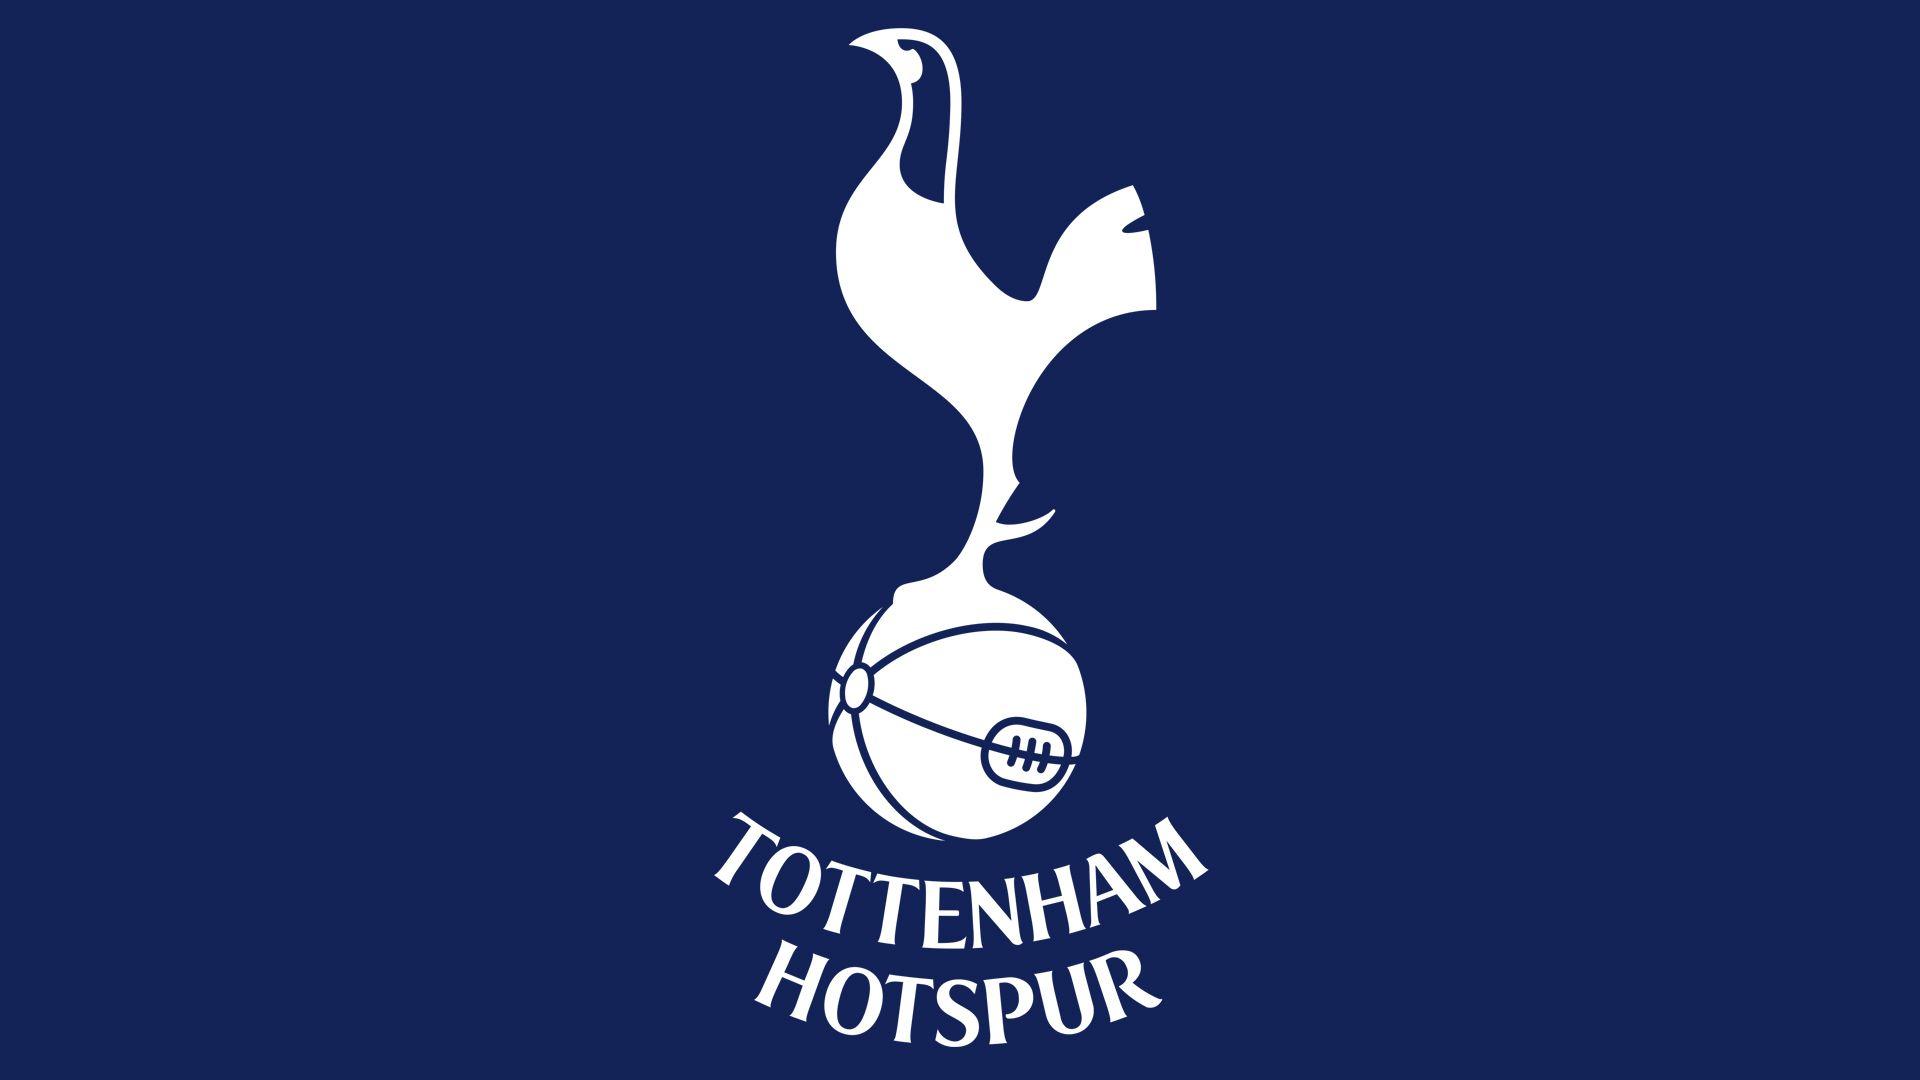 Tottenham Hotspur Logo - Tottenham Hotspur Logo,Tottenham Hotspur Symbol, Meaning, History ...